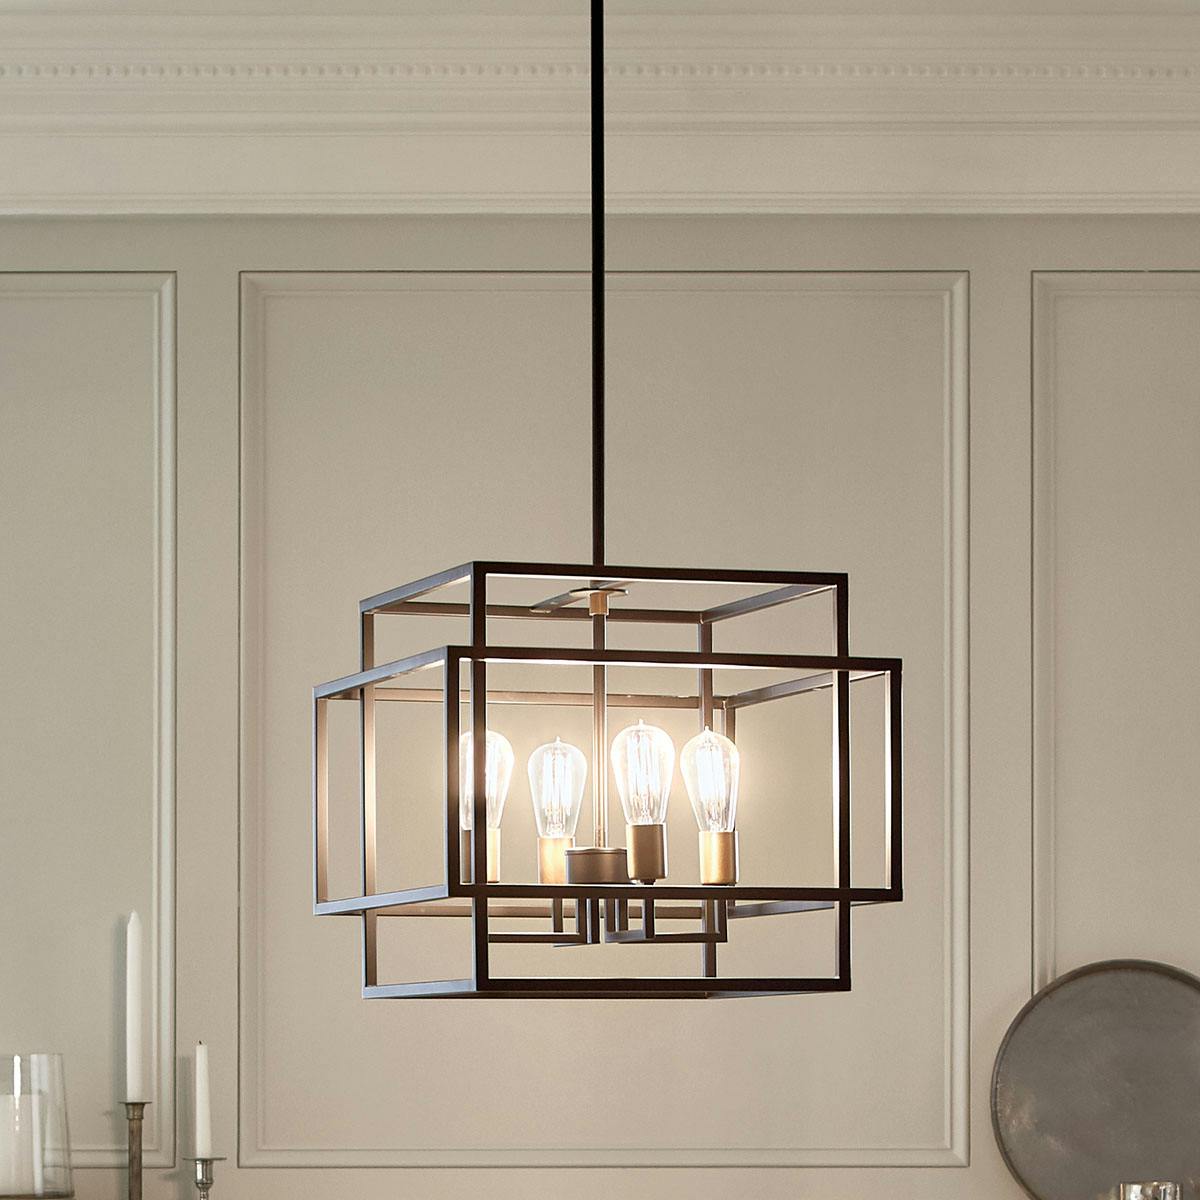 Day time dining room image featuring Taubert pendant 43984BK